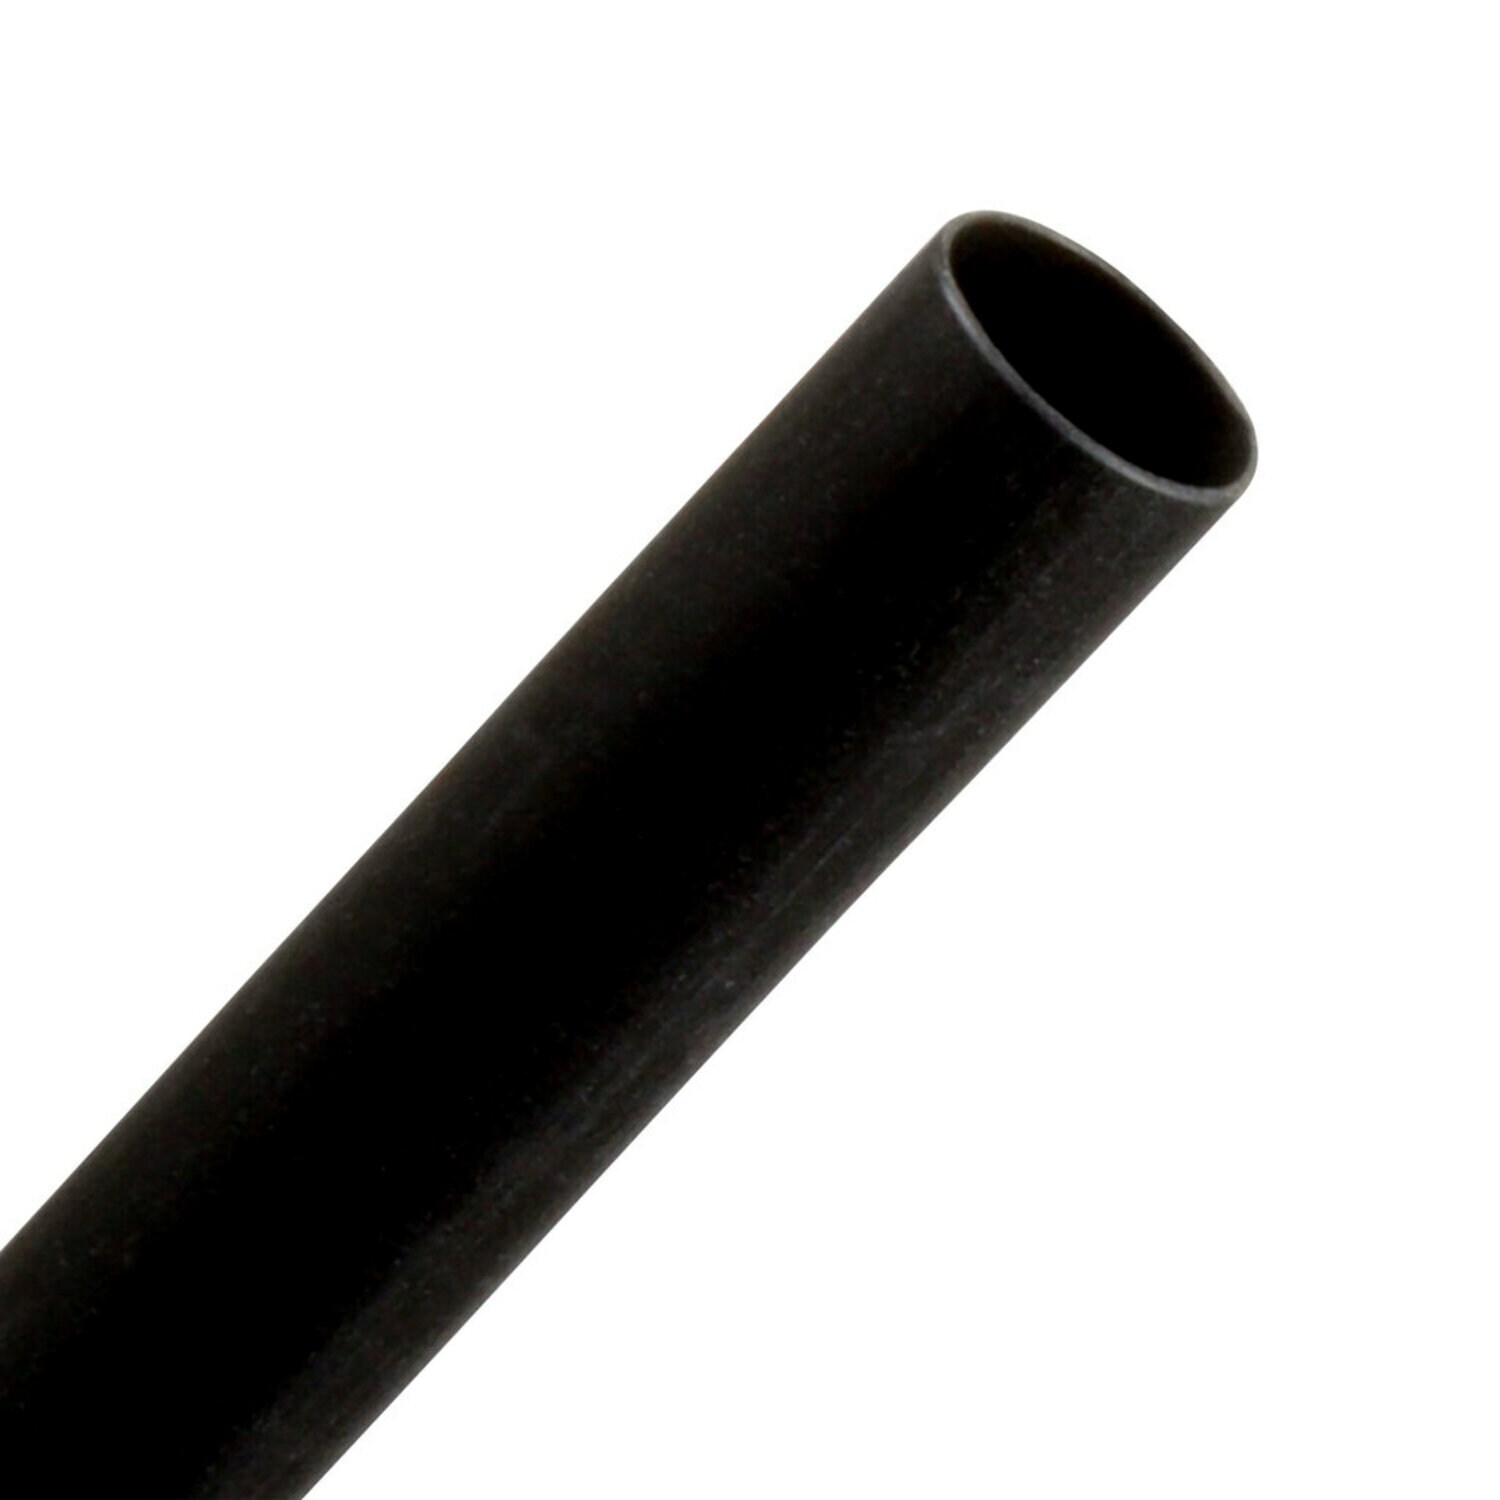 7000133603 - 3M Heat Shrink Thin-Wall Tubing FP-301-1/4-48"-Black-200 Pcs, 48 in
Length sticks, 200 pieces/case